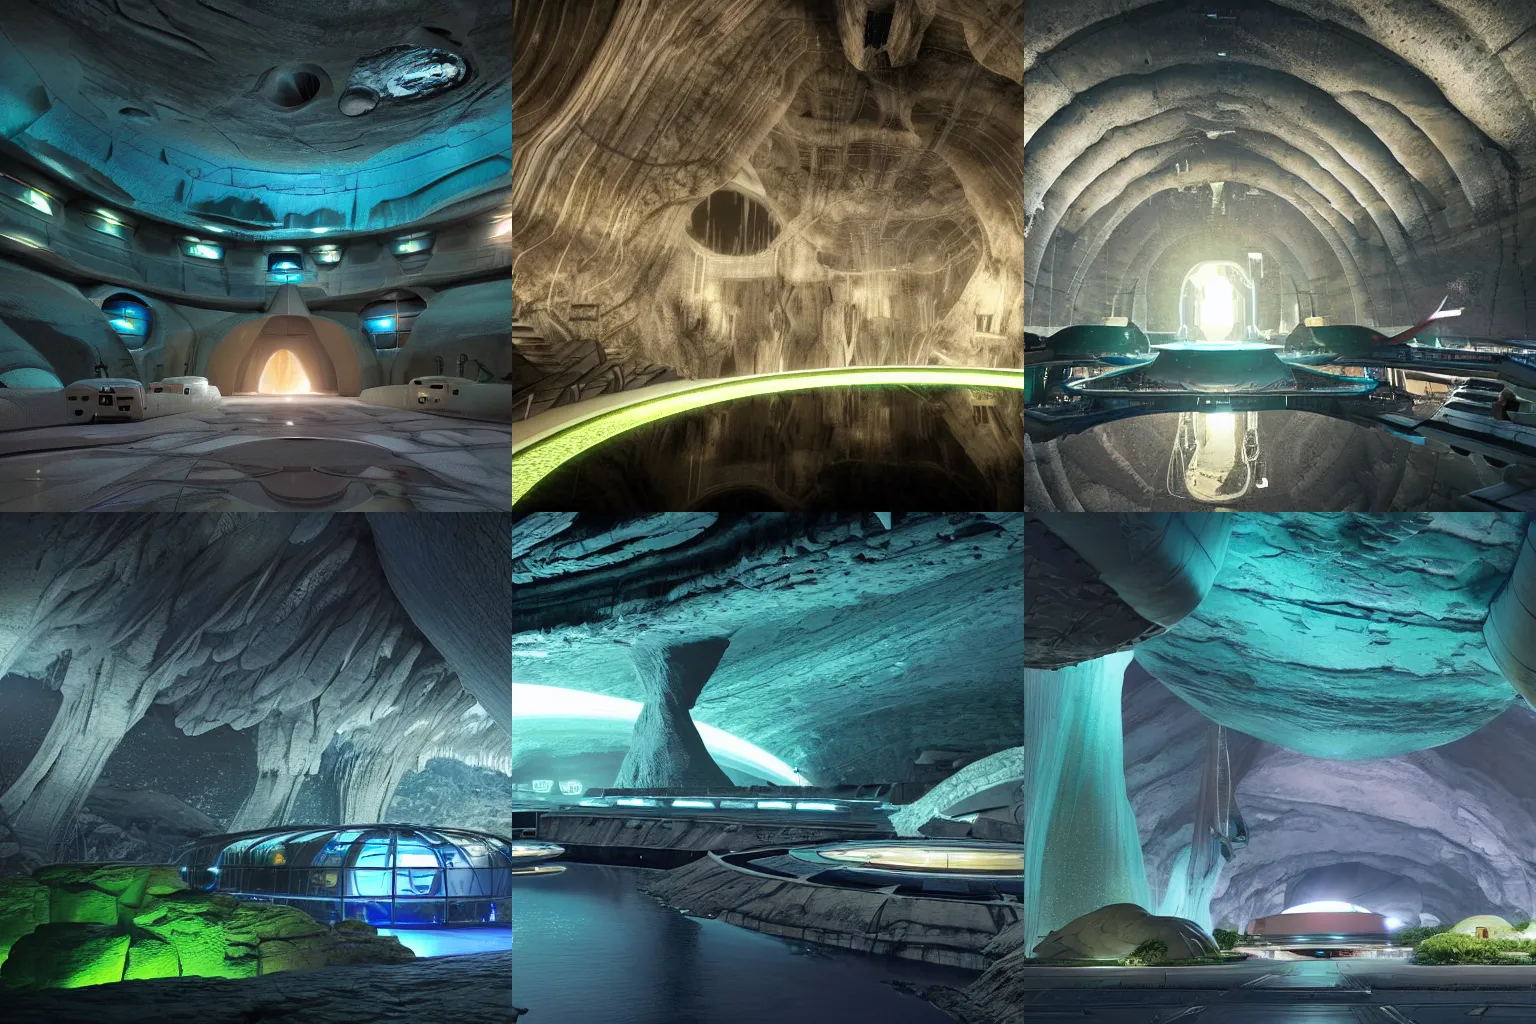 Prompt: A science fiction spaceport at night with spaceships on landing pads, glowing lights, a river with a hydroelectric dam, and green spaces, all inside an enormous cavern, cavern ceiling visible with large stalactites, unreal engine, photorealistic